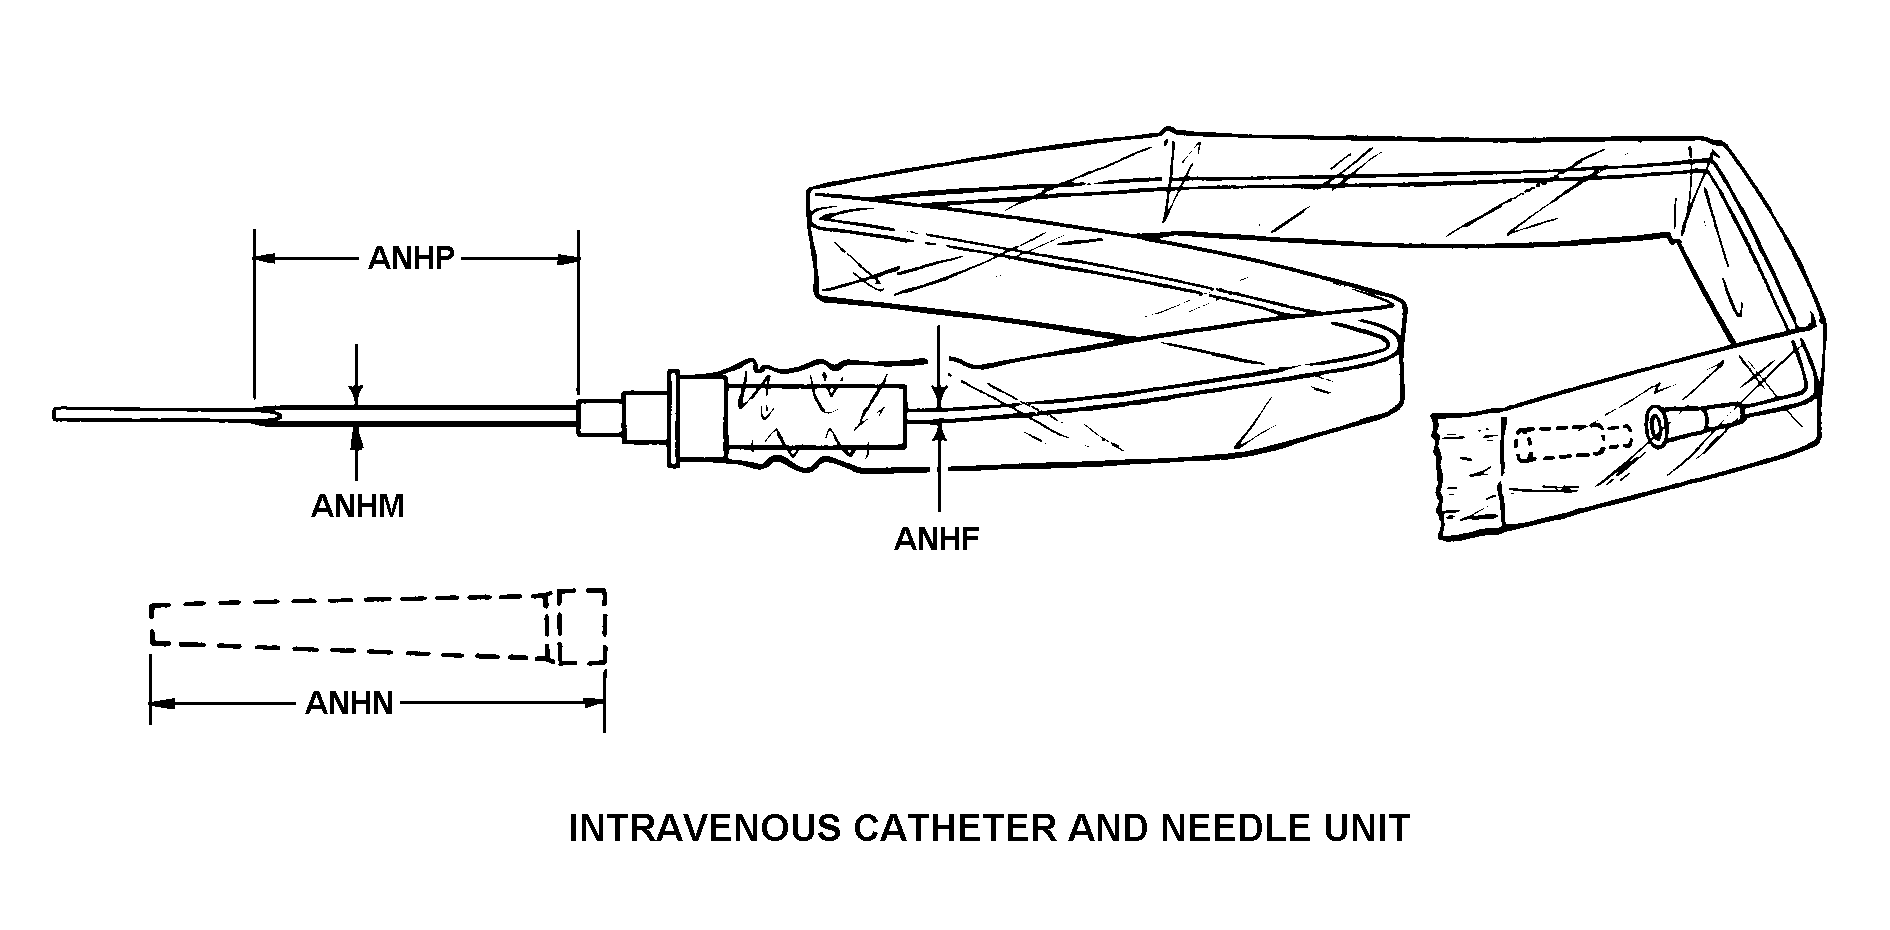 INTRAVENOUS CATHETER AND NEEDLE UNIT style nsn 6515-01-239-2494